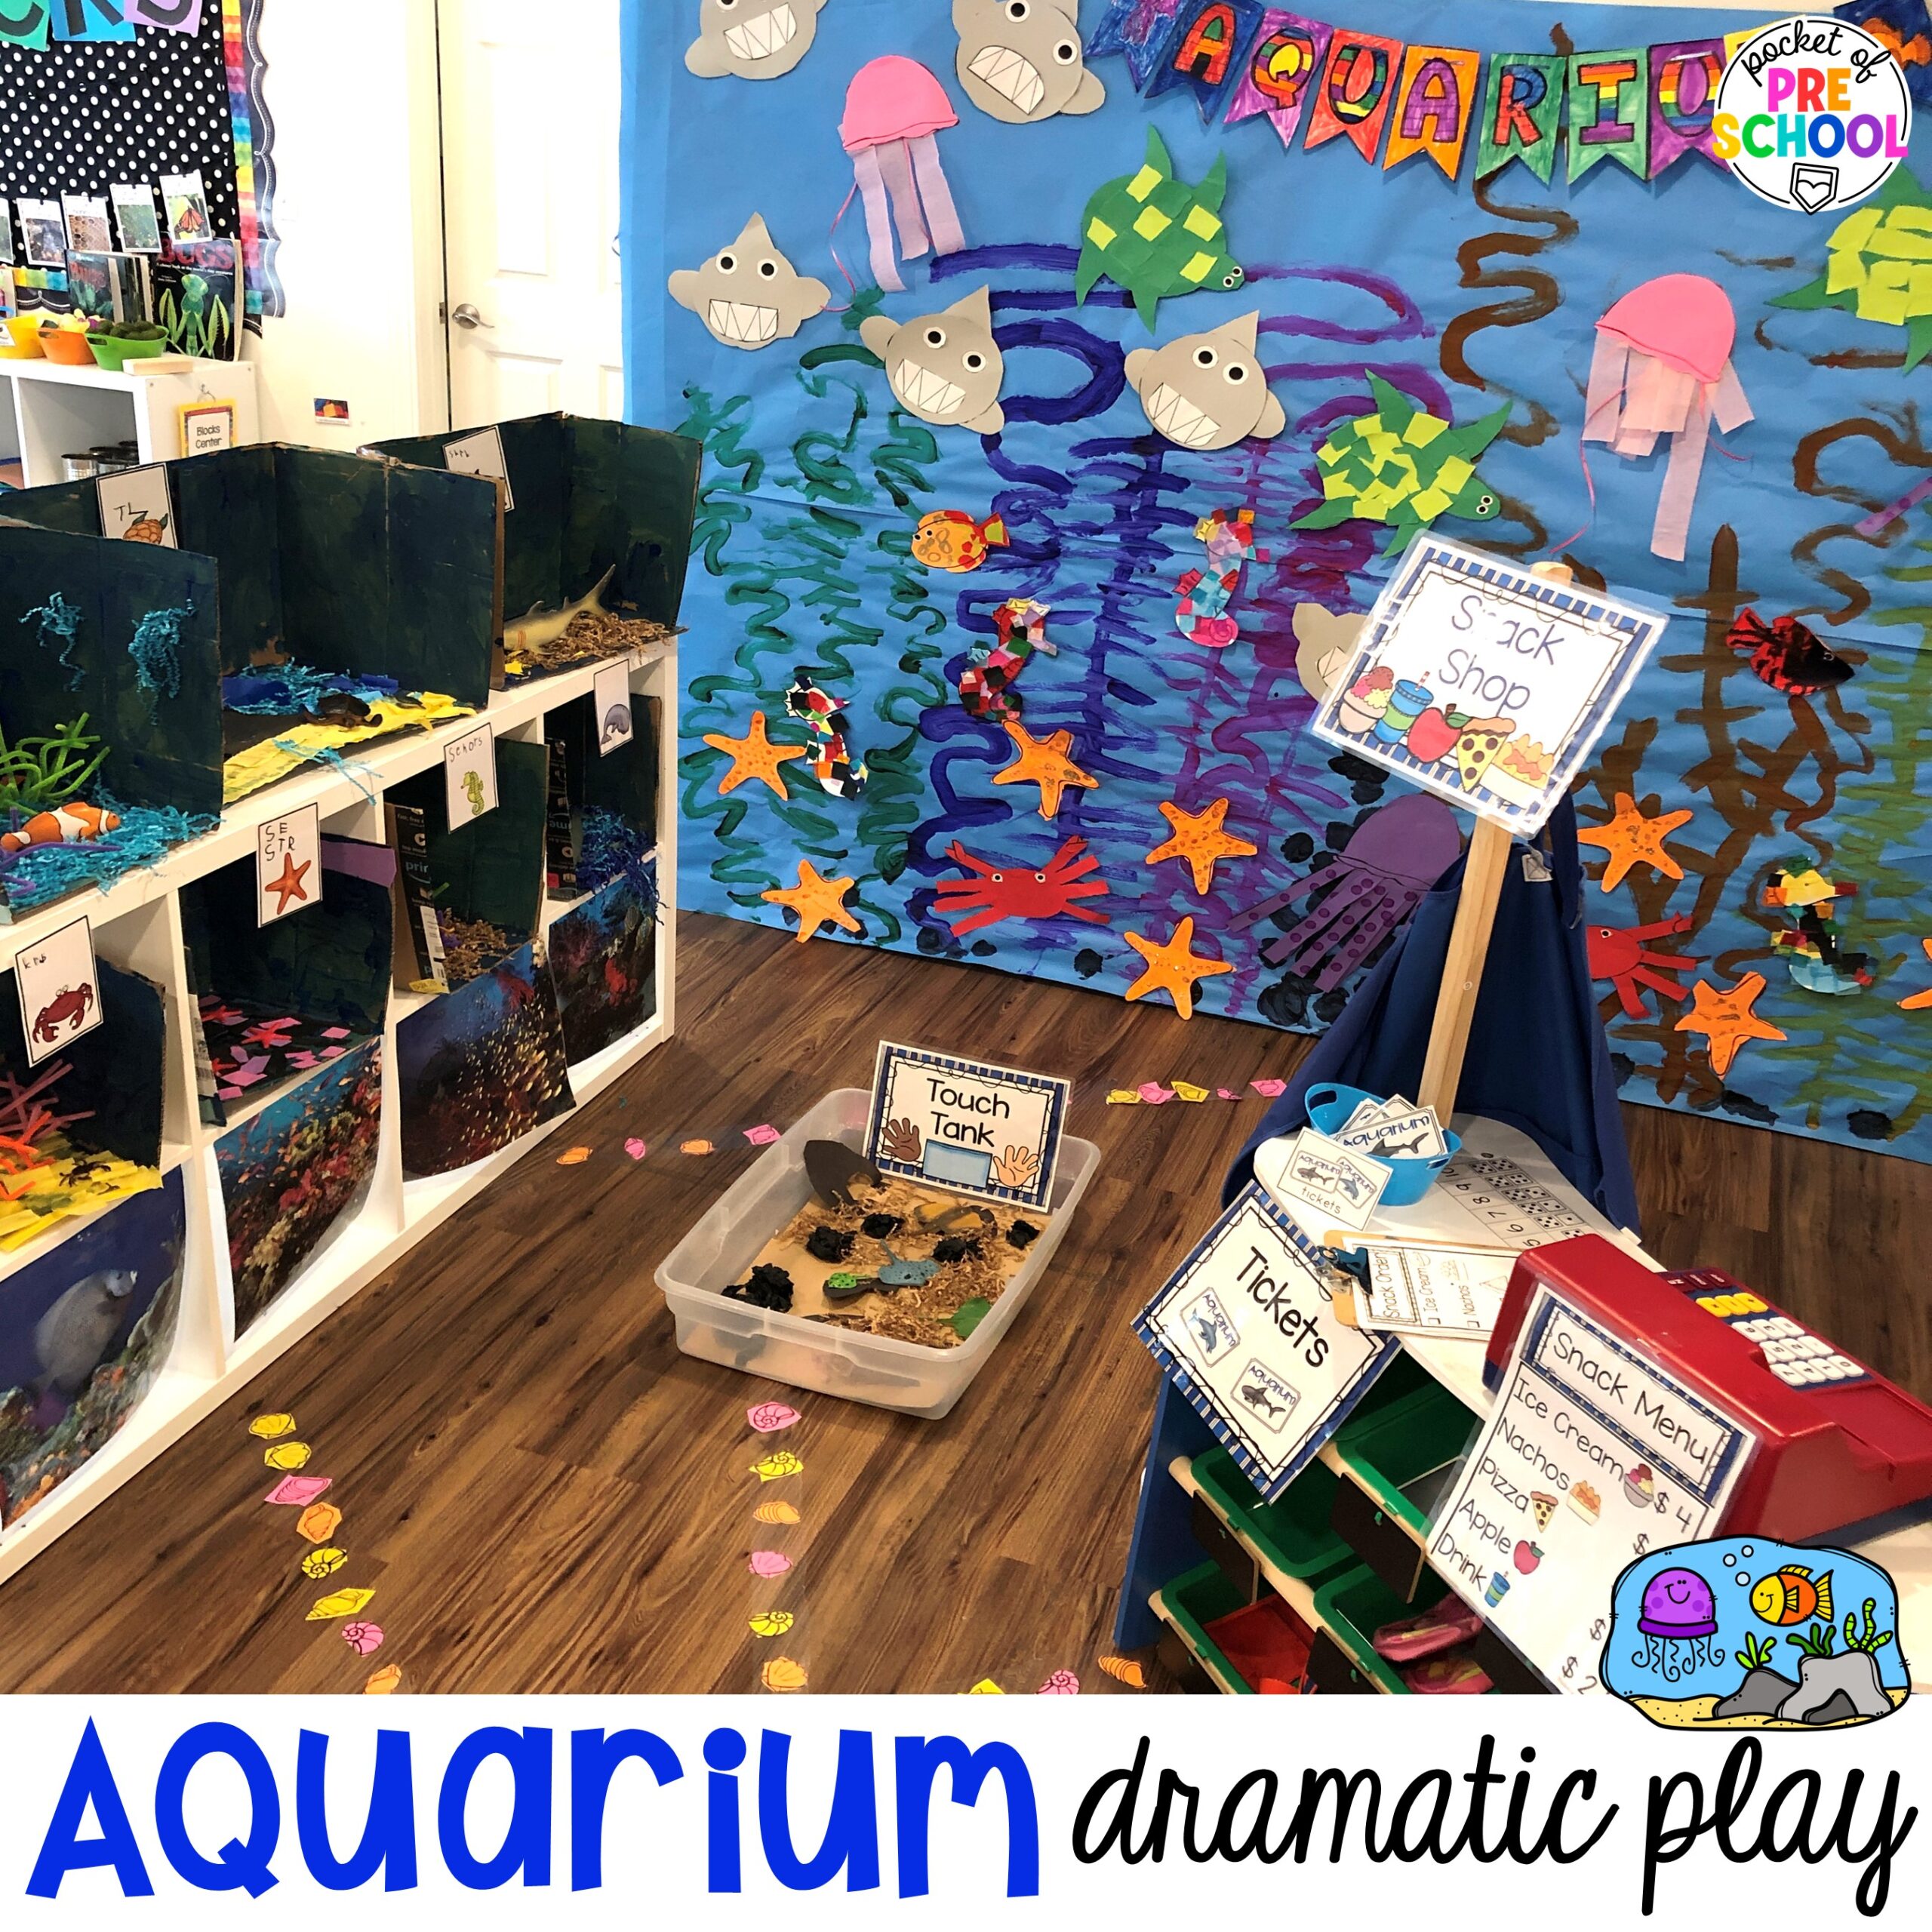 Set up an aquarium in your dramatic play area for preschool, pre-k, and kindergarten students to learn math, literacy, science, and social skills.